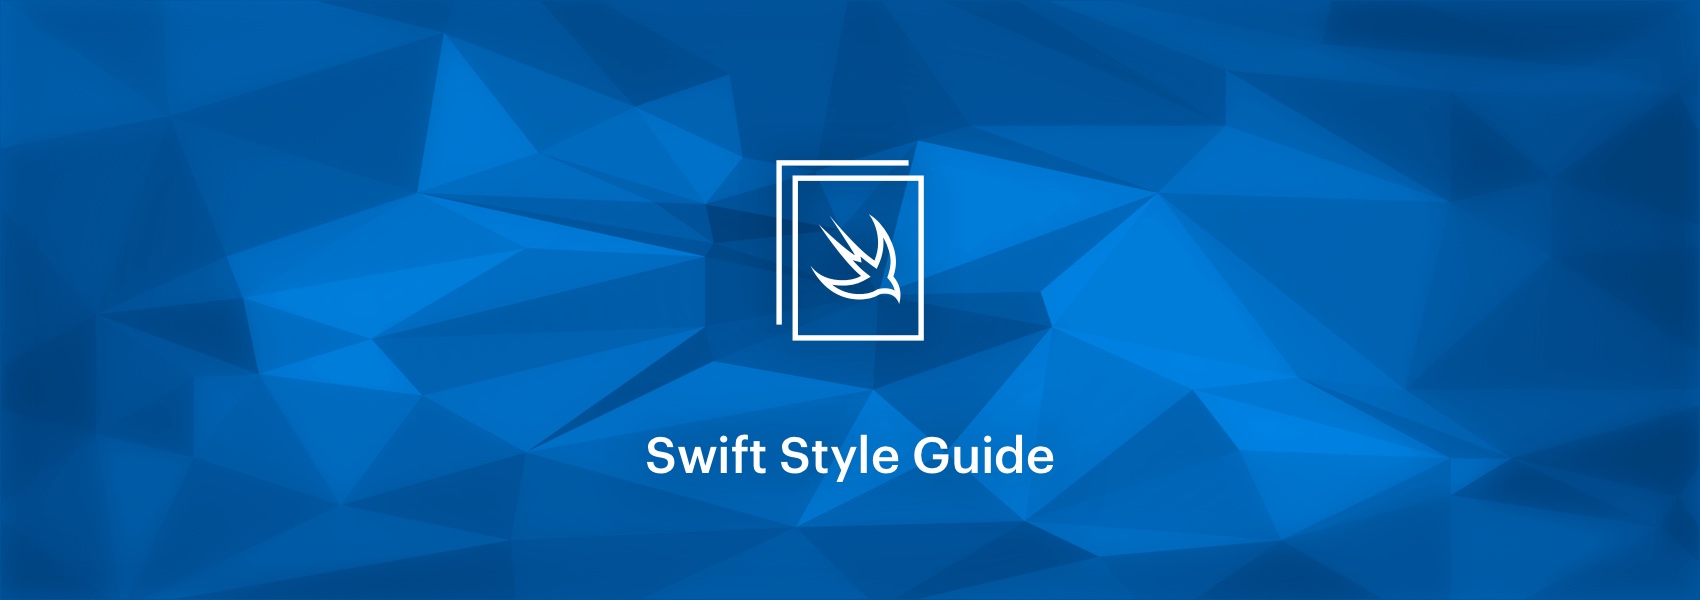 Swift Style Guide